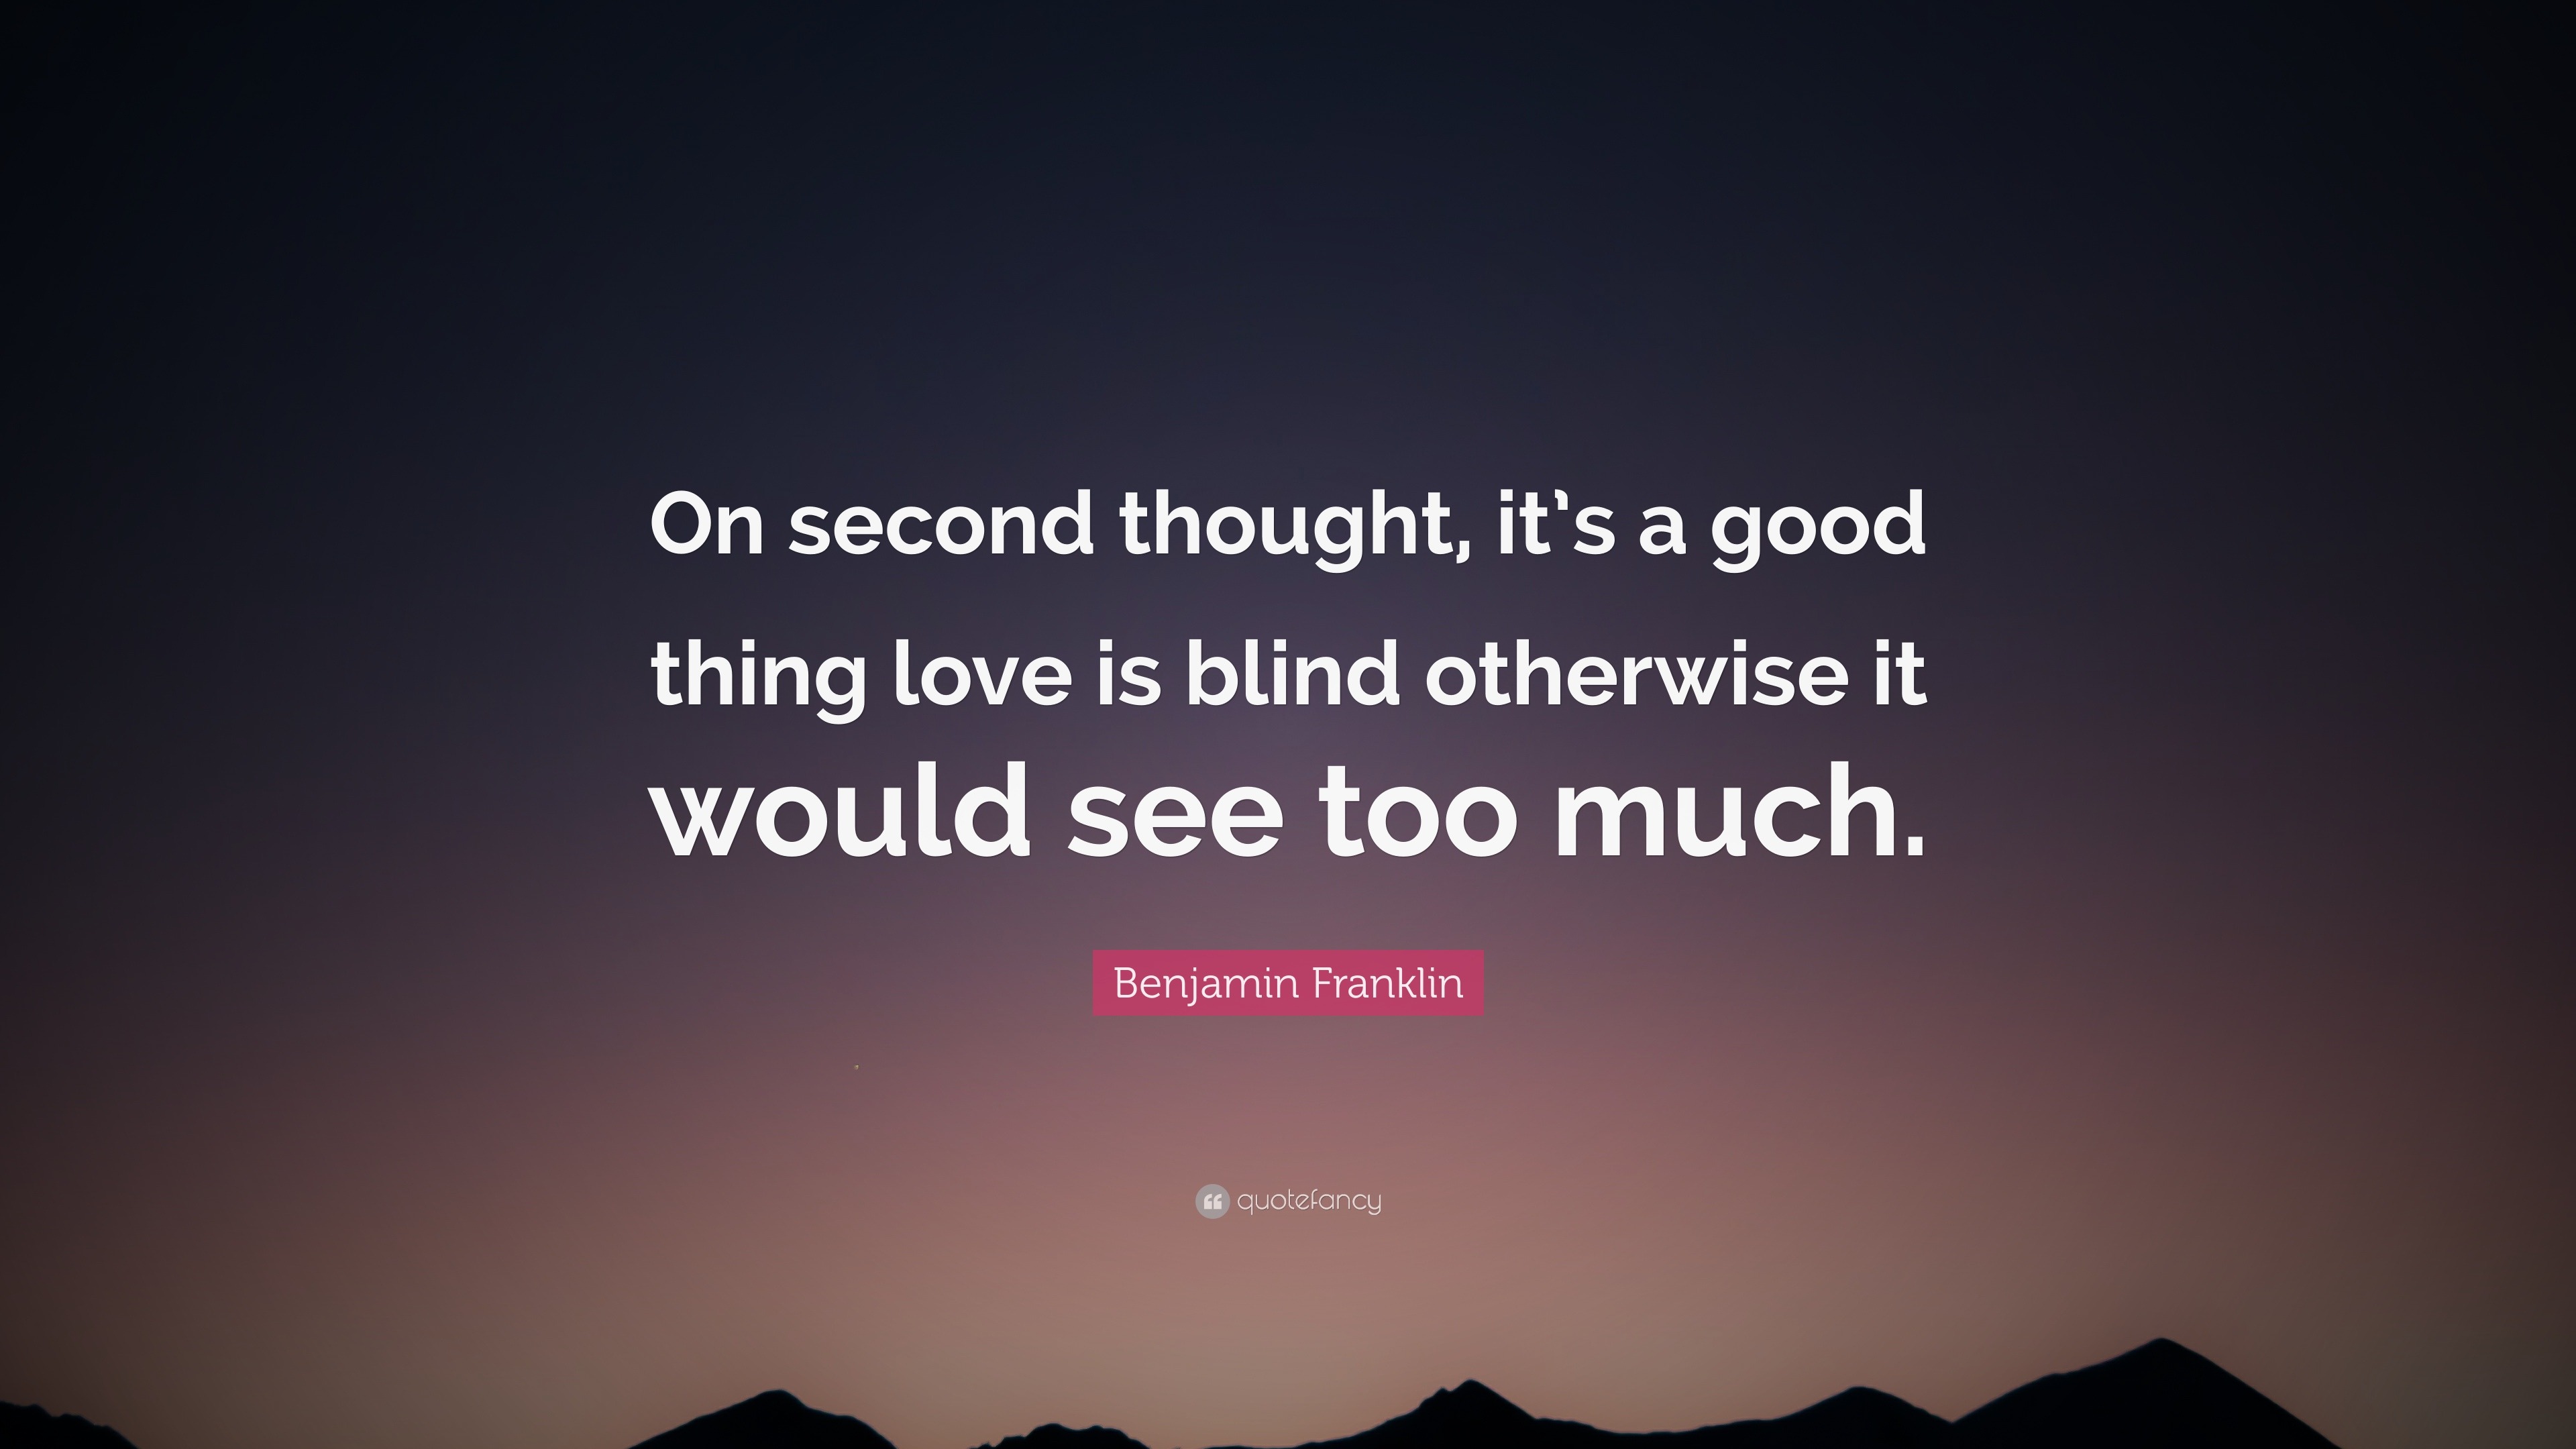 Benjamin Franklin Quote: “On second thought, it’s a good thing love is ...